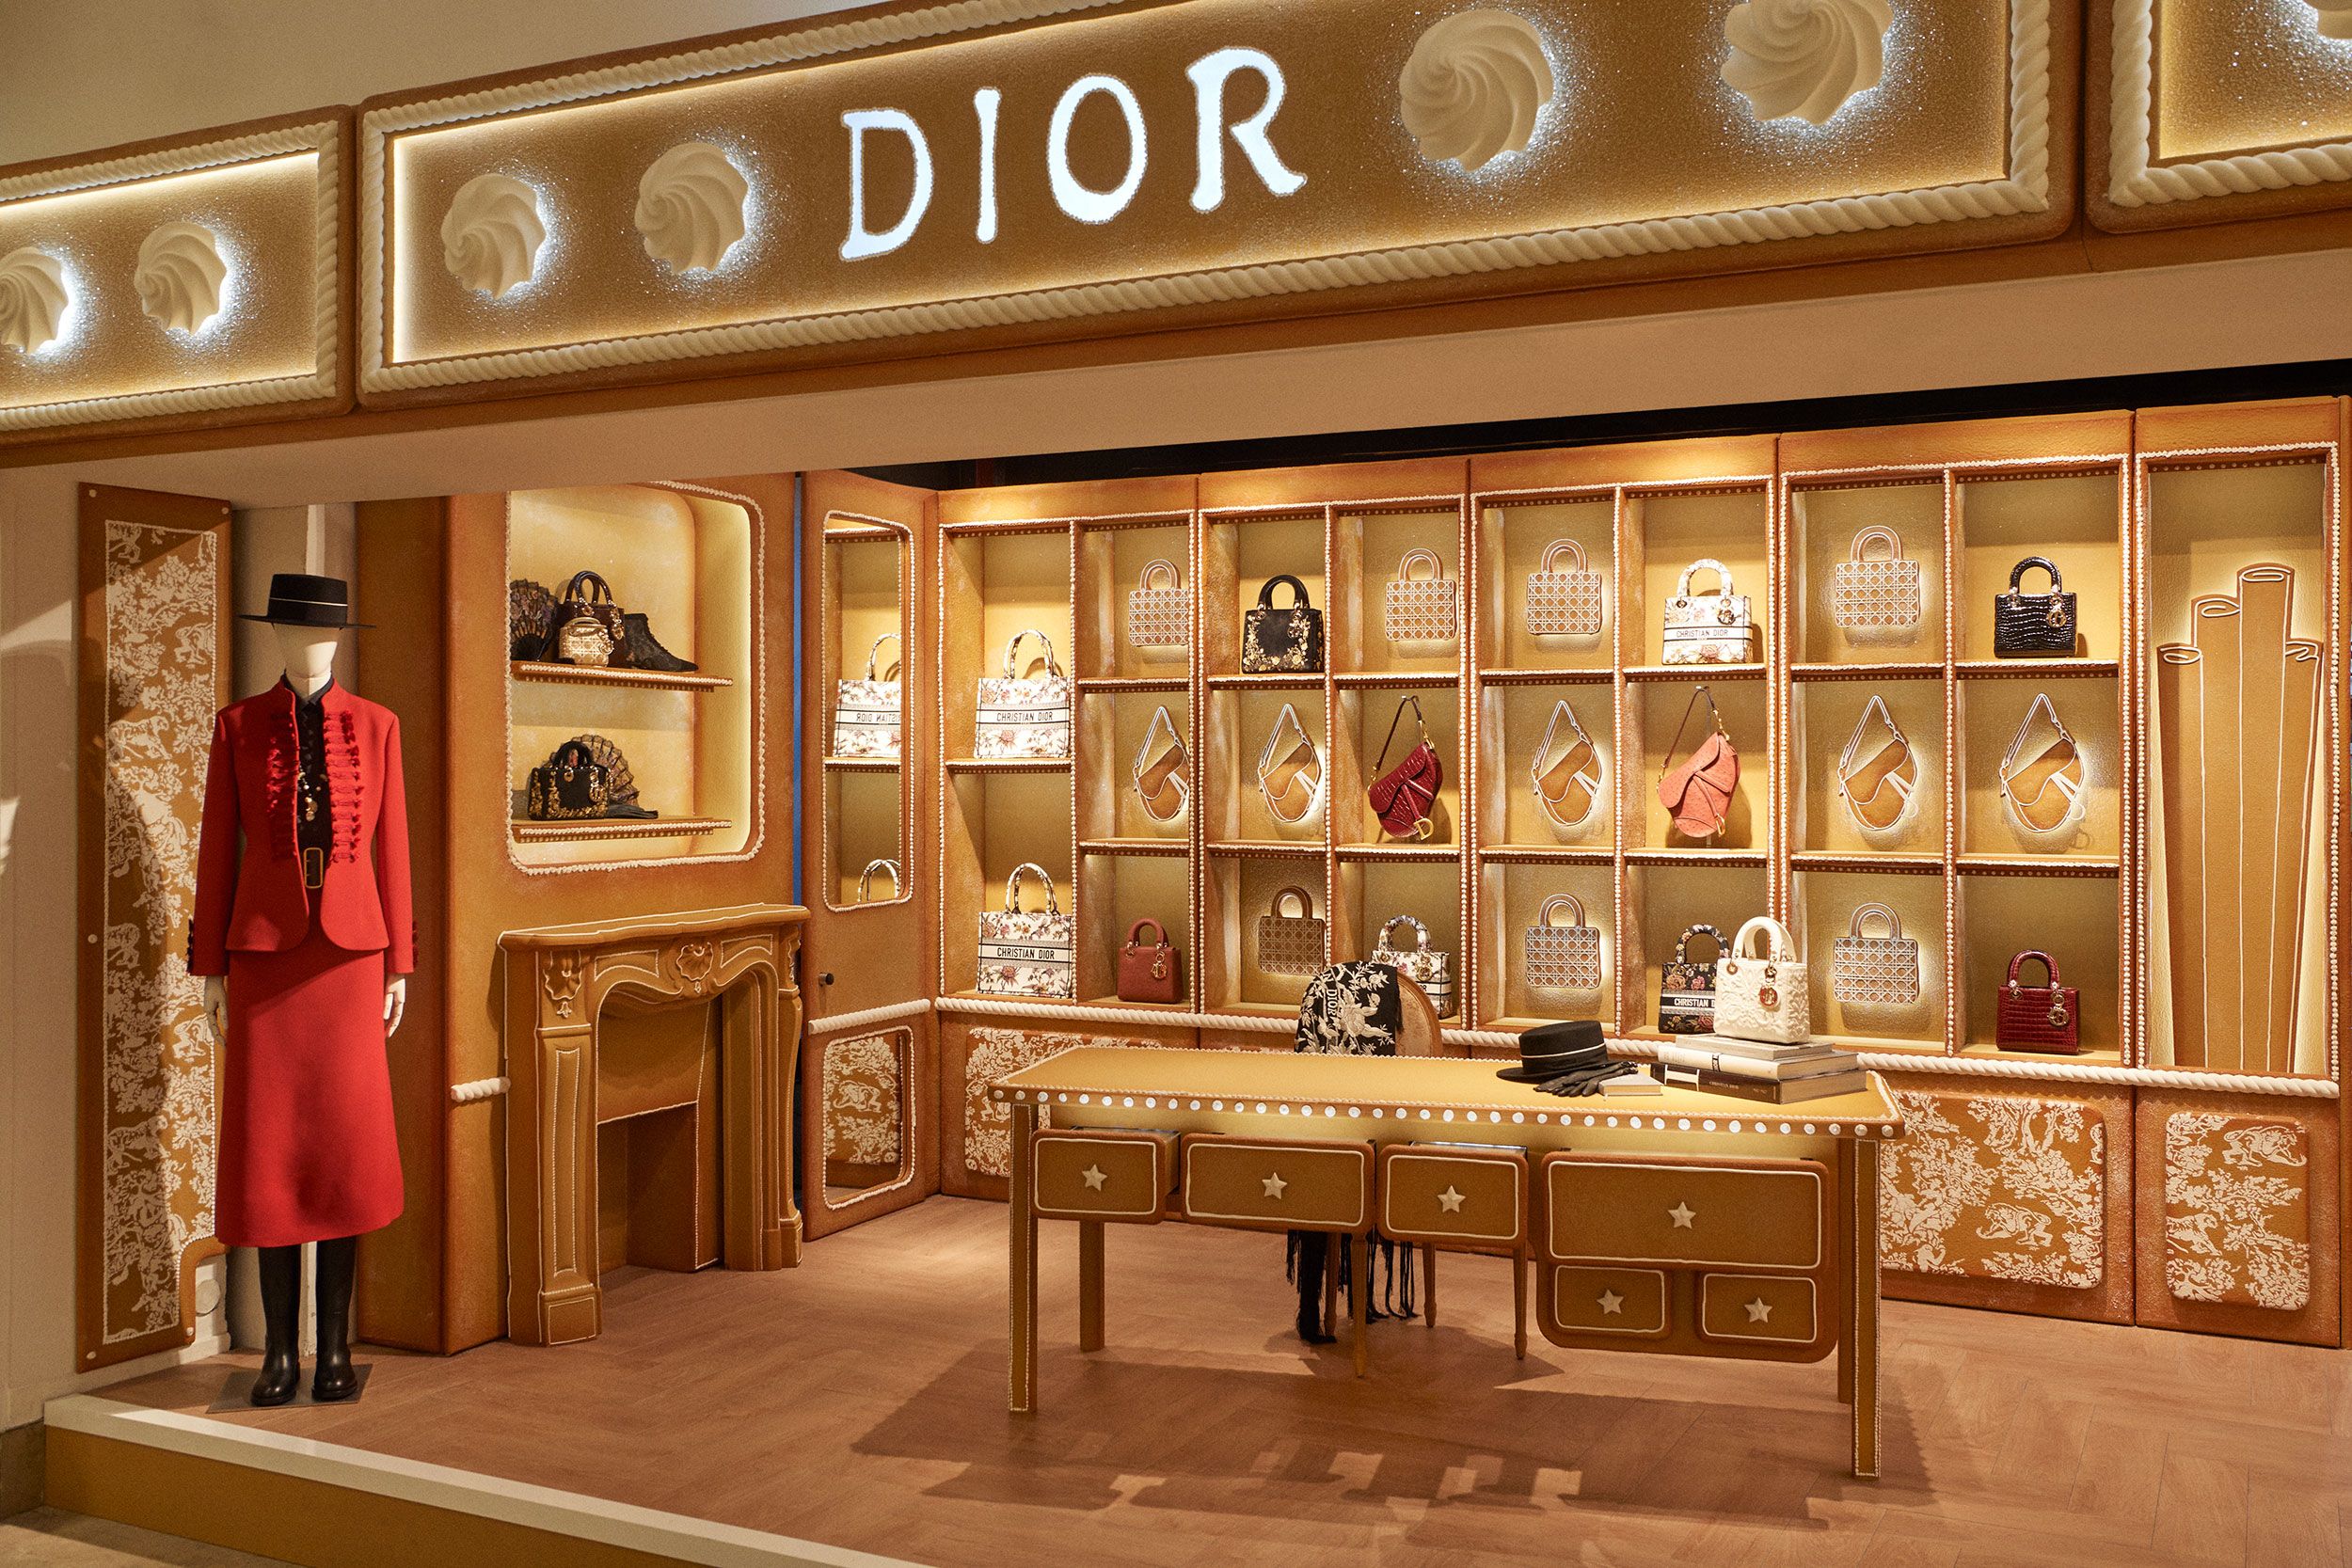 Dior Takes To The Iconic Halls Of Harrods For A Pop-Up Display